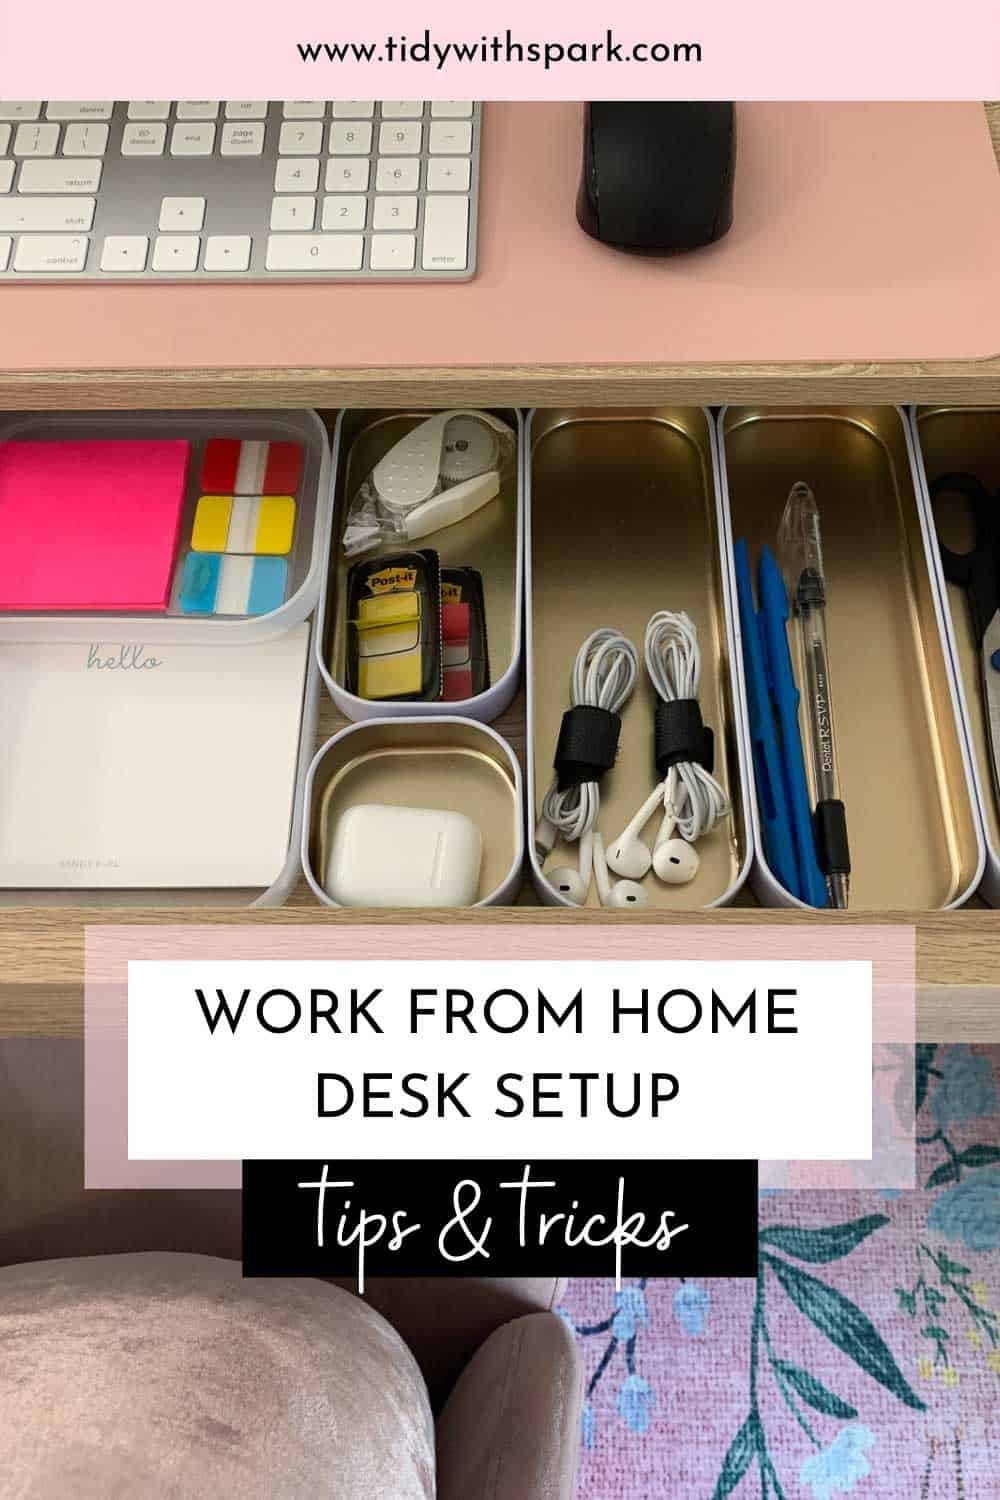 My work from home desk organization setup - Tidy with SPARK